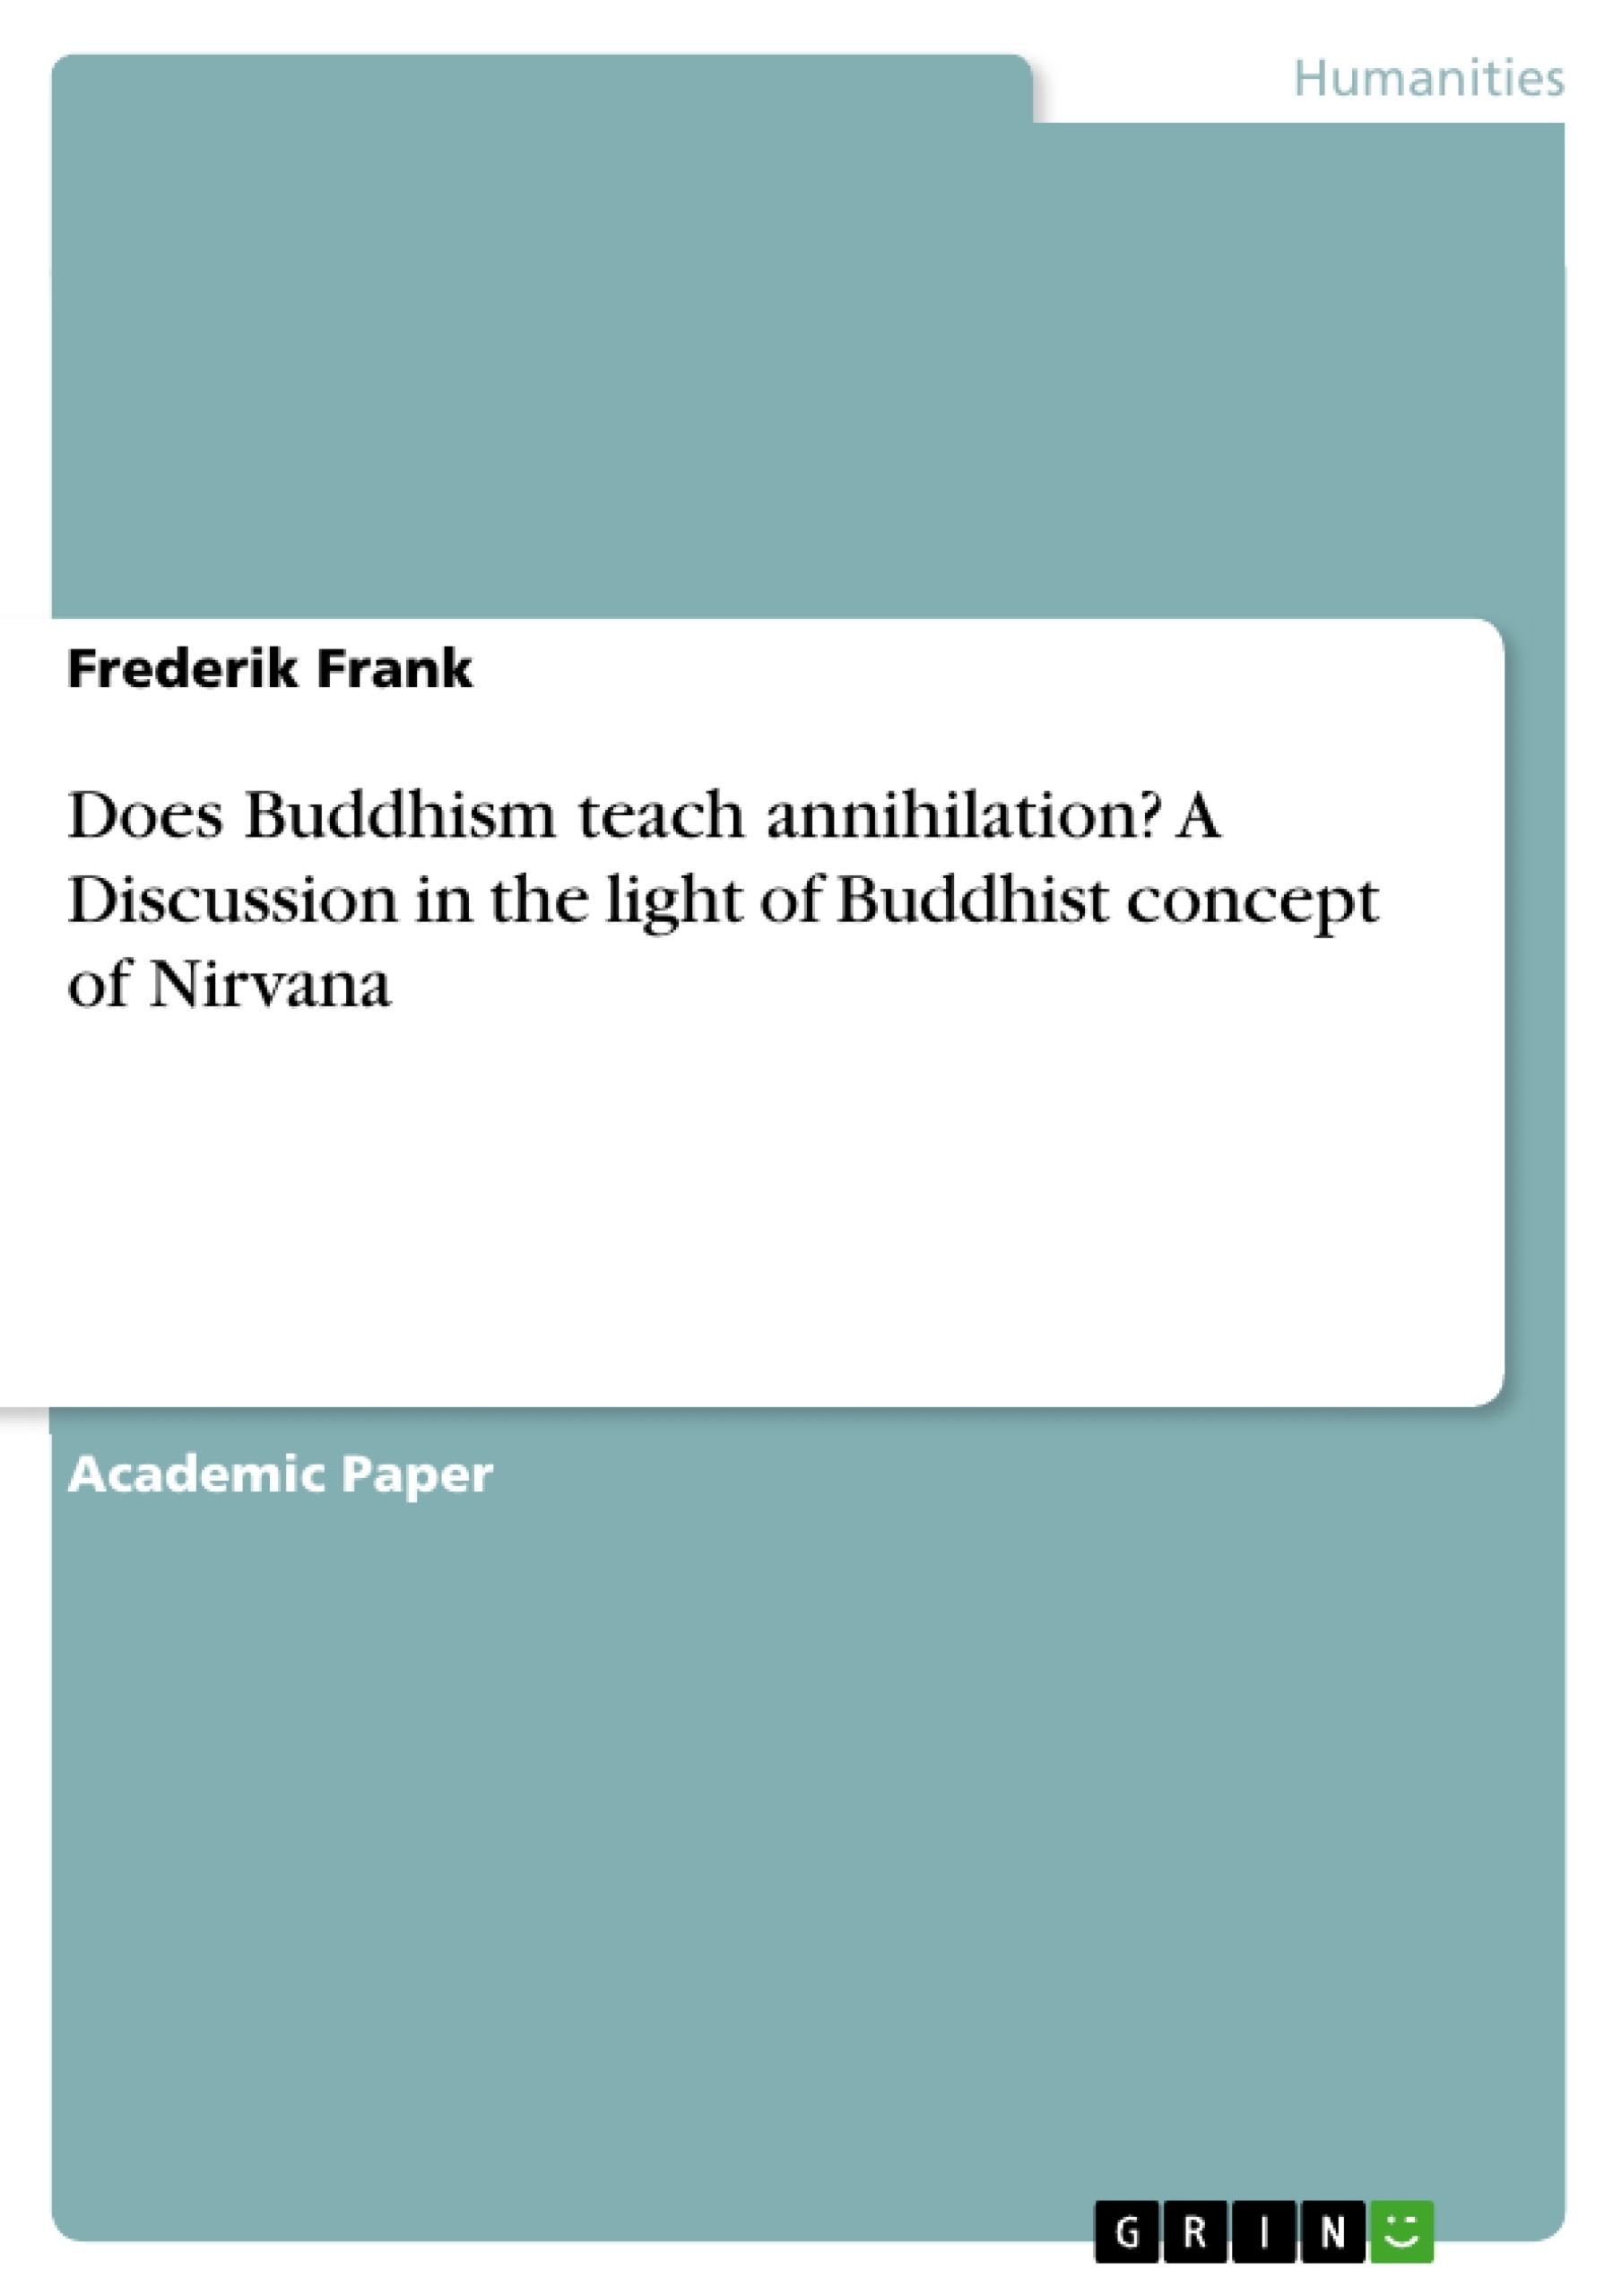 Titre: Does Buddhism teach annihilation? A Discussion in the light of Buddhist concept of Nirvana